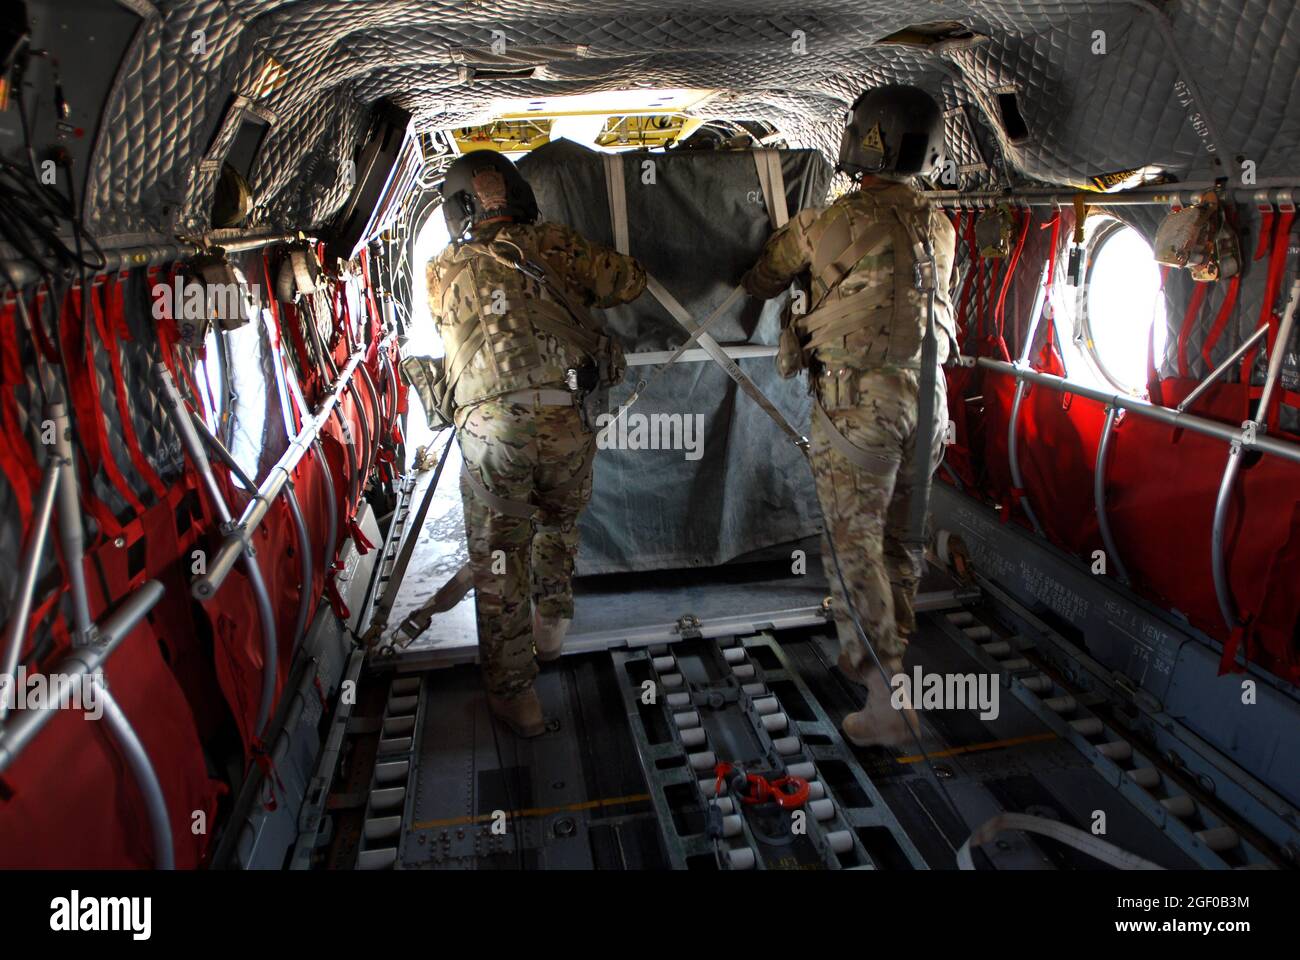 Master Sgt. Guy Miller (left) and Sgt. Shawn Adams unload cargo from a CH-47 Chinook in Uruzgan province, Afghanistan, May 12, 2013. The Chinooks, operated by members of Bravo Company, 2nd Battalion, 104th Aviation Regiment from the Connecticut and Pennsylvania Army National Guard, have played a vital part in the mission in Afghanistan since their arrival in Dec. 2012 by performing resupply, retrograde, and planned missions. (U.S. Army photo by Sgt. Jessi Ann McCormick) Stock Photo